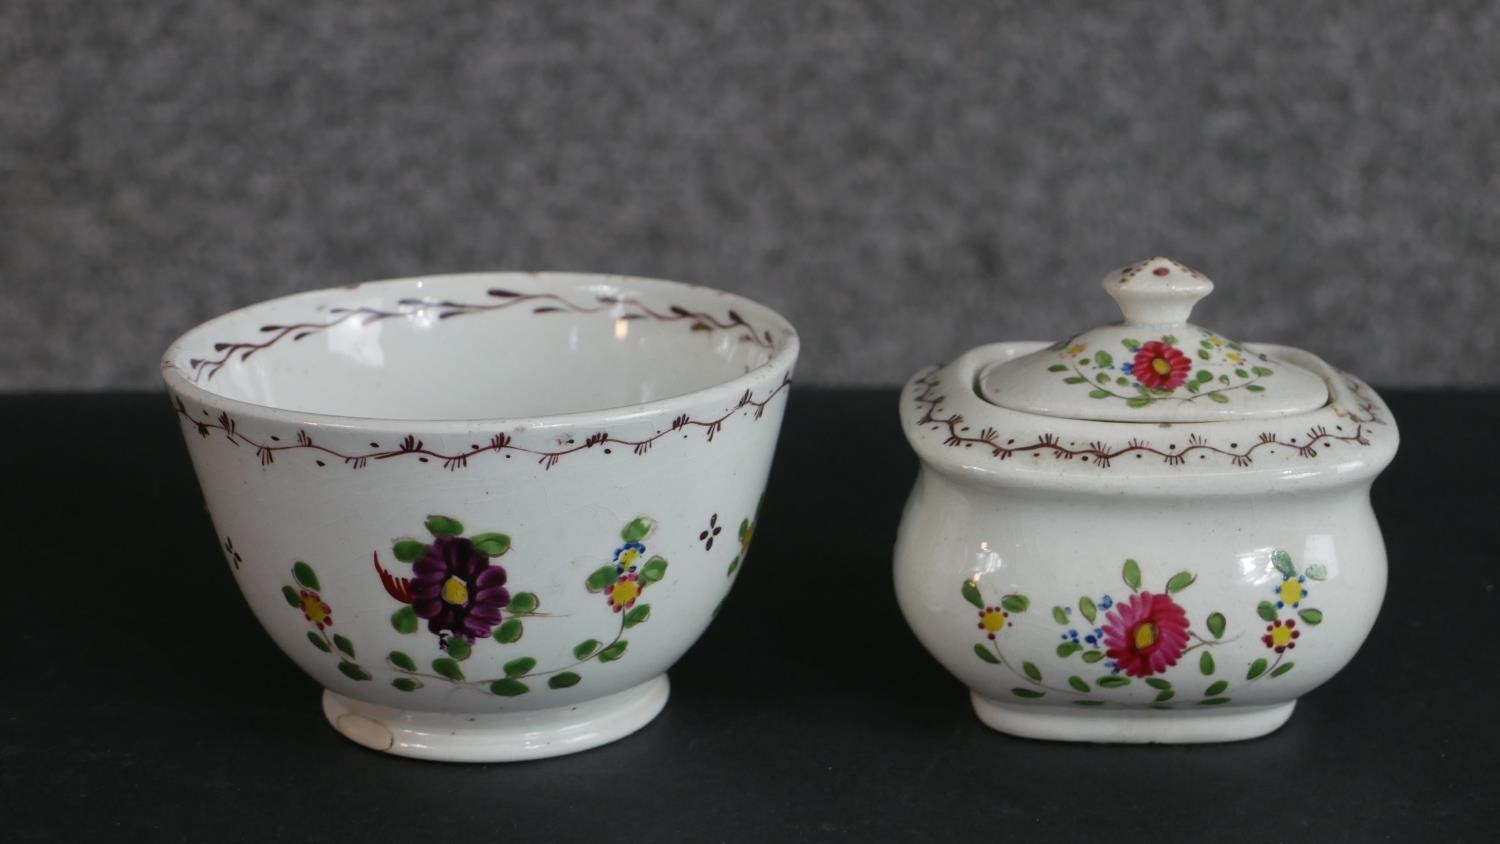 A 19th century floral design hand-painted ceramic dolls tea set for four people (one cup missing), - Image 4 of 8